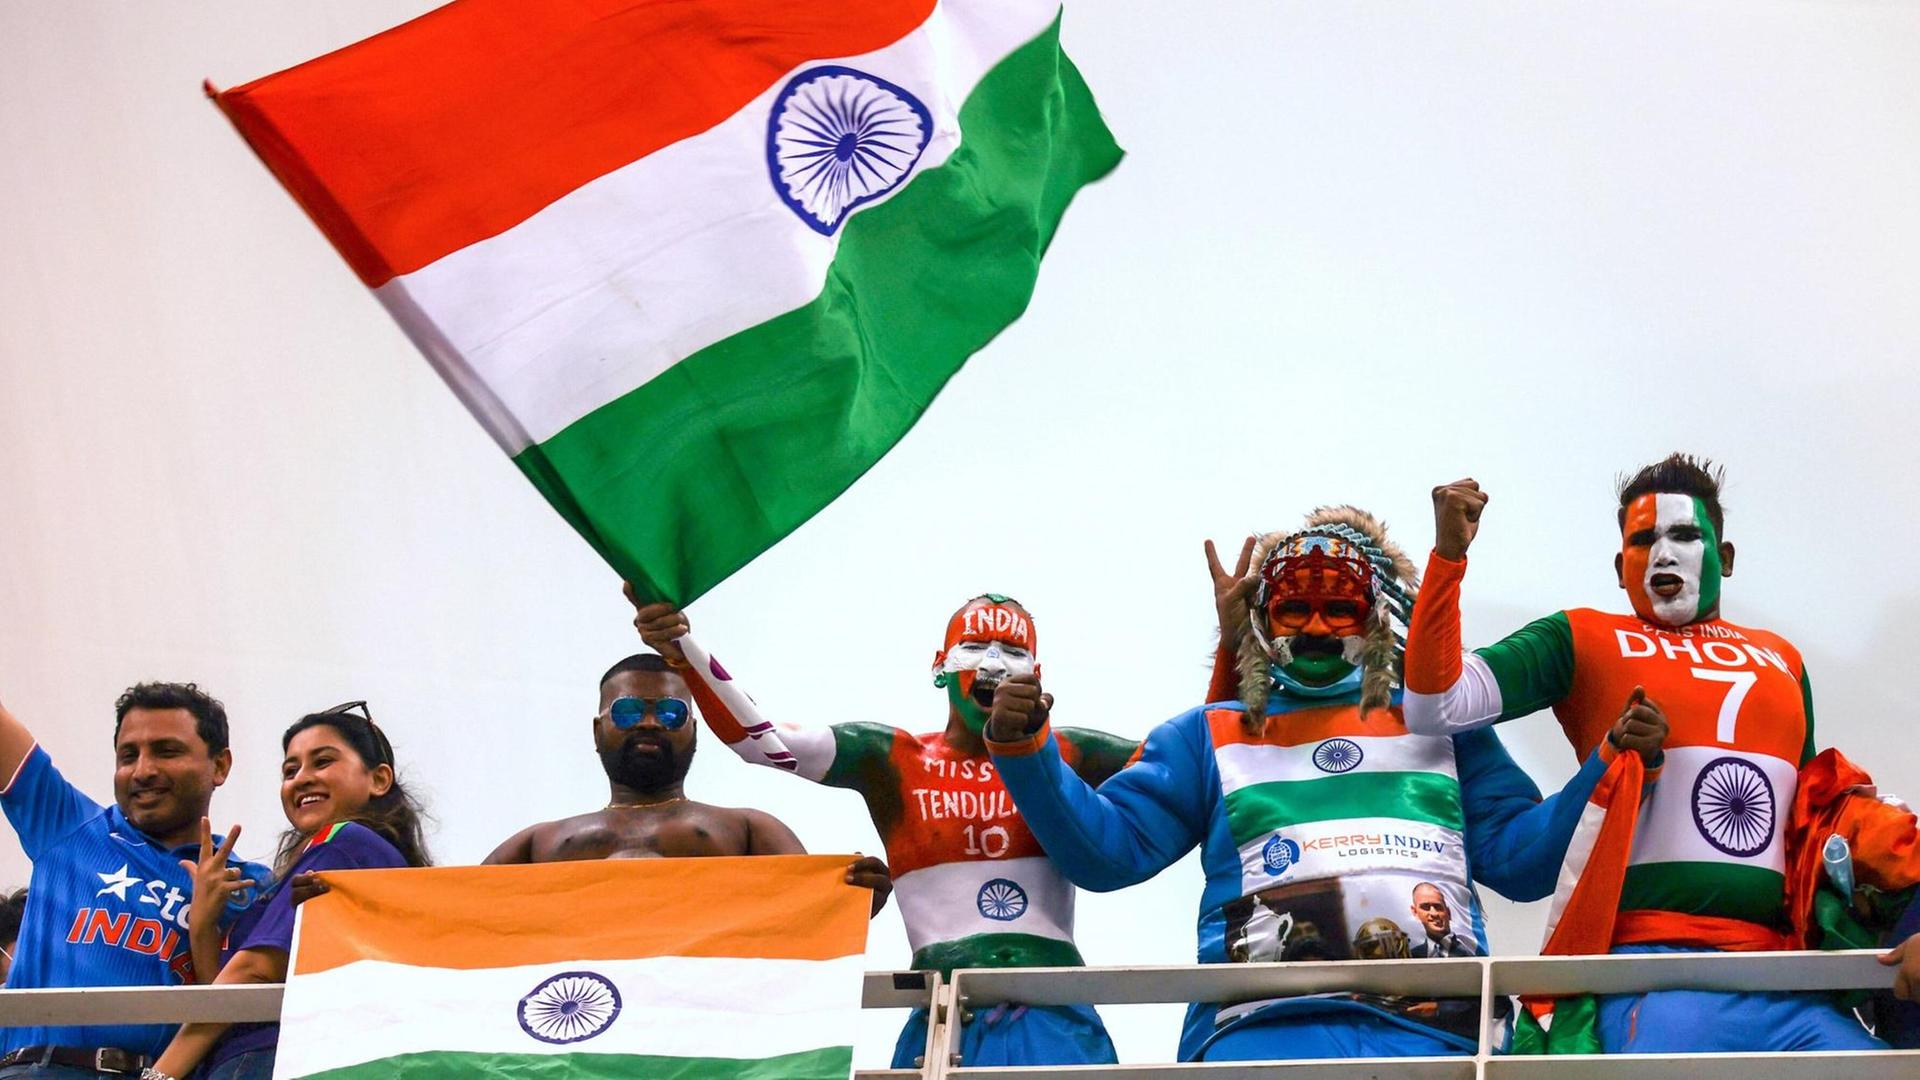 24th October 2021 Dubai International Cricket Stadium Supporters of India wearing costumes yell and wave a national flag during the ICC Men s T20 World Cup match between India and Pakistan at Dubai International Cricket Stadium PUBLICATIONxNOTxINxUK ActionPlus12334161 DavidxGray